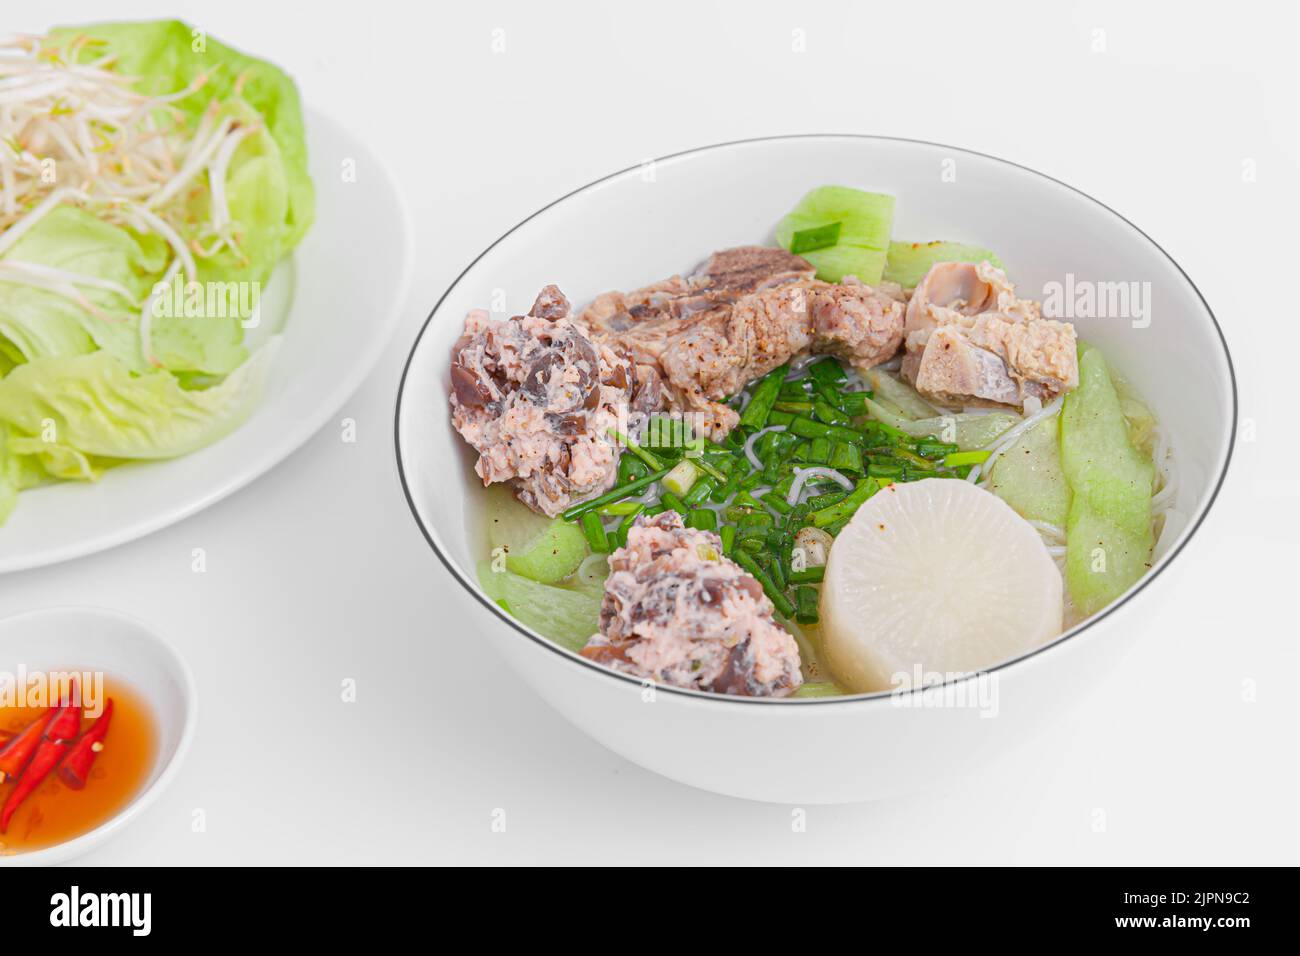 Bun Moc, Rice noodle soup with pork ball, Vietnamese food isolated on white background, close-up Stock Photo